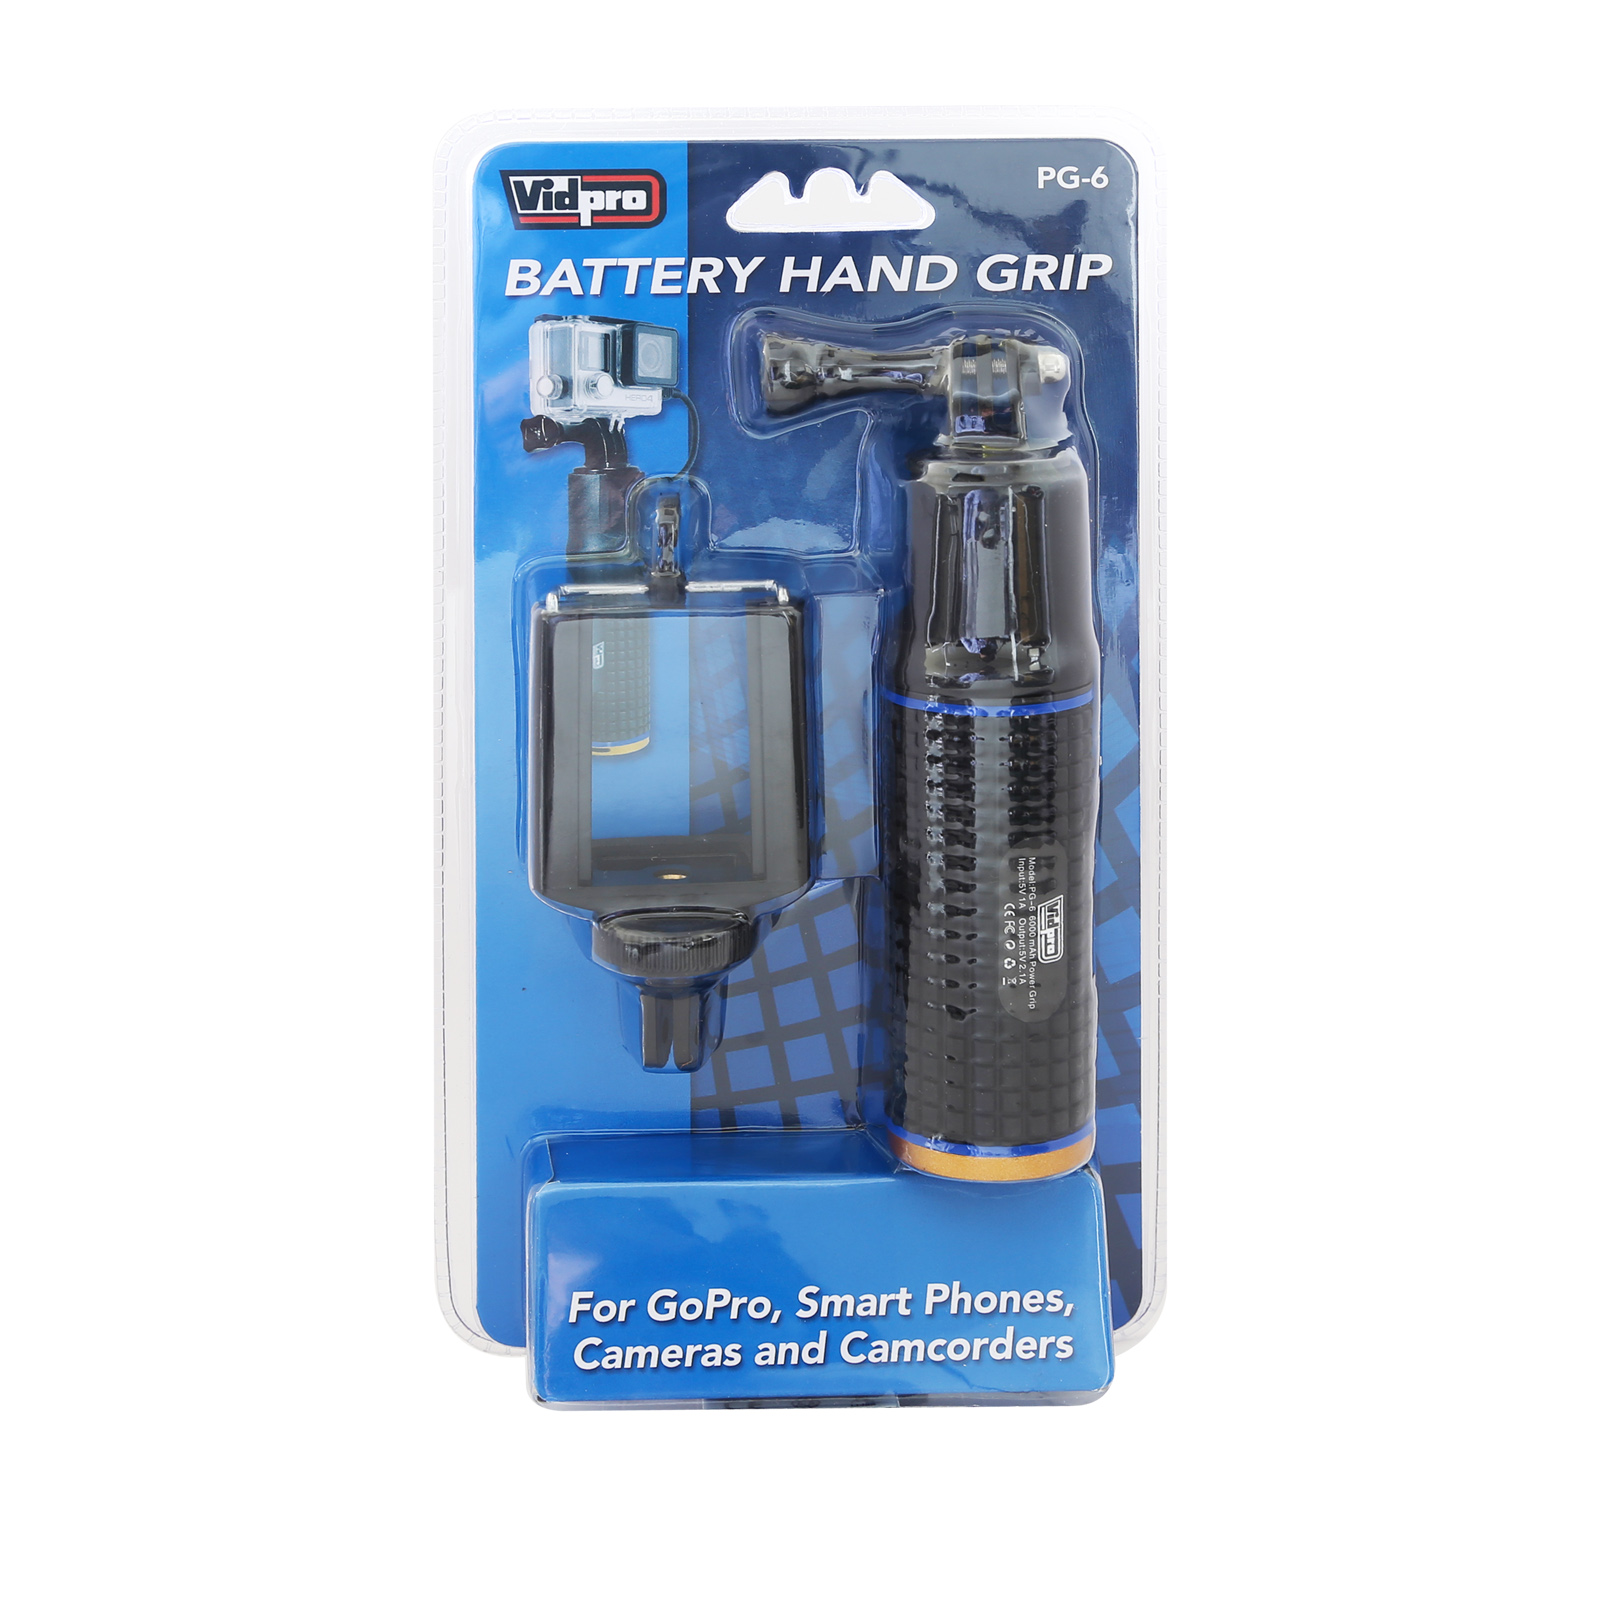 PG-6 Battery Hand Grip for Smartphones, cameras and camcorders